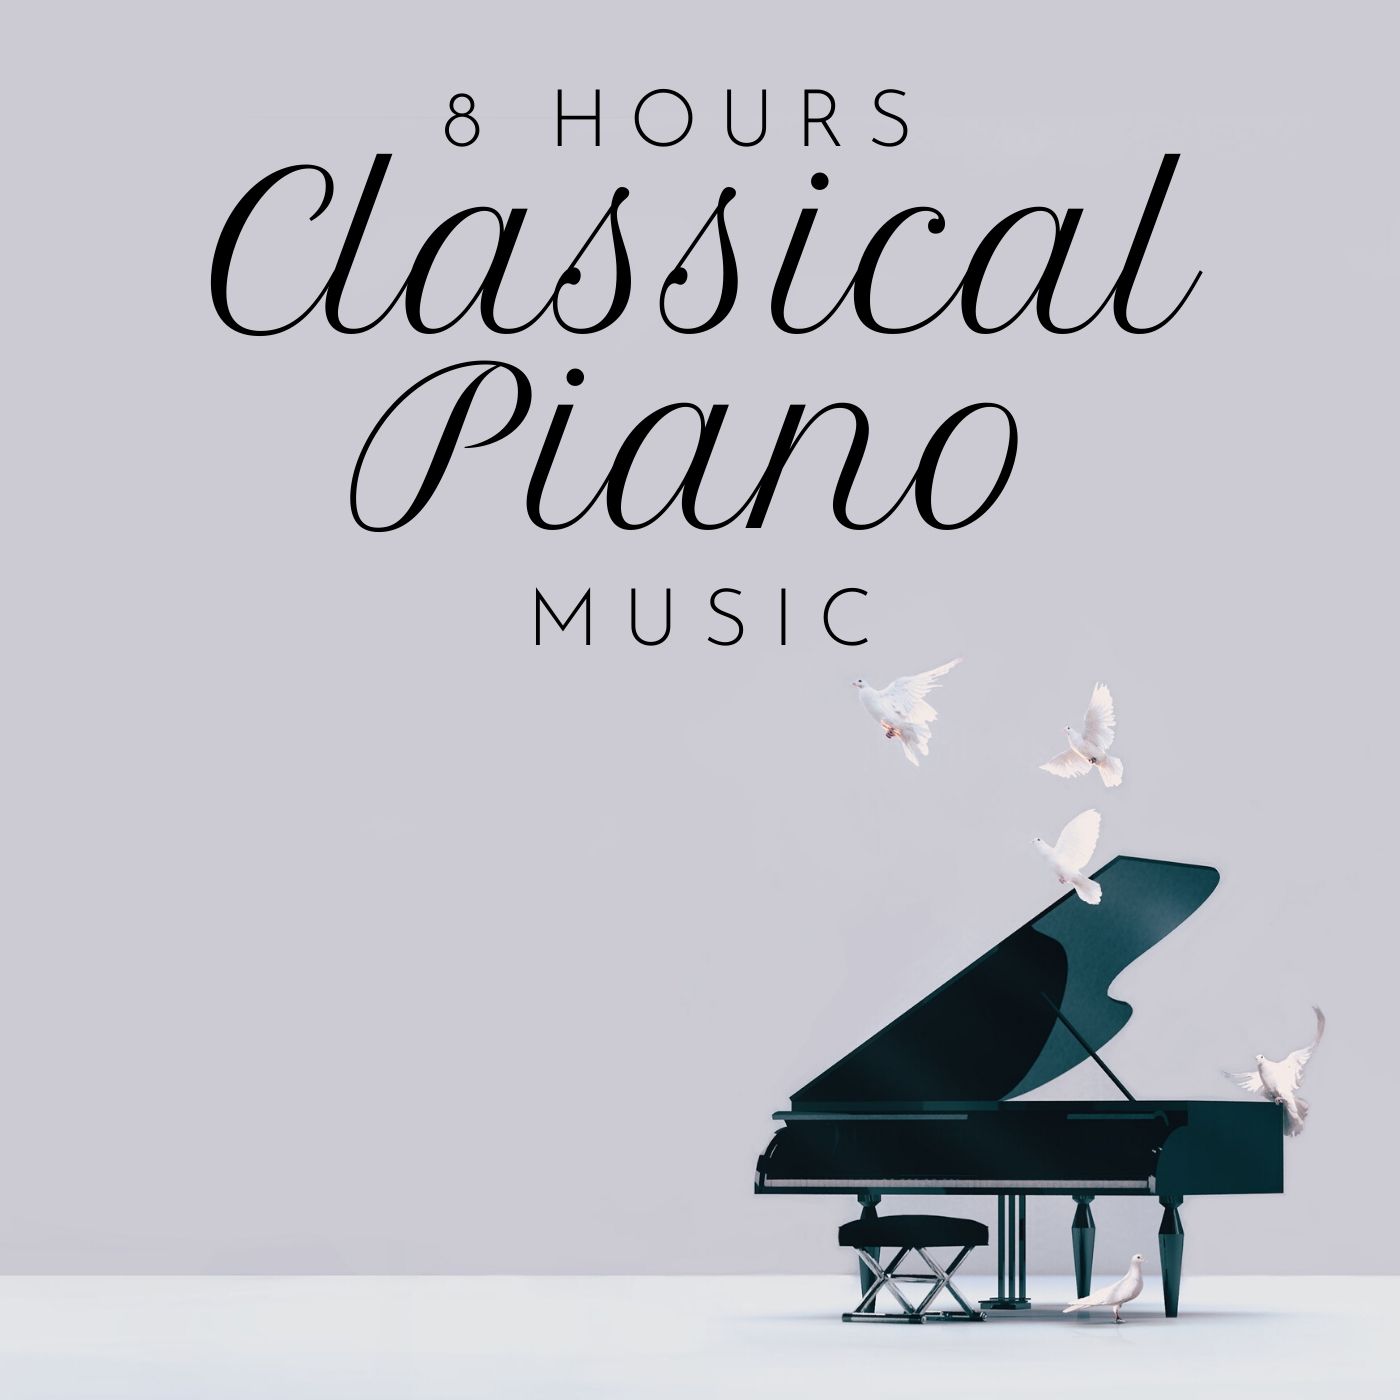 8 Hours Classical Piano Music